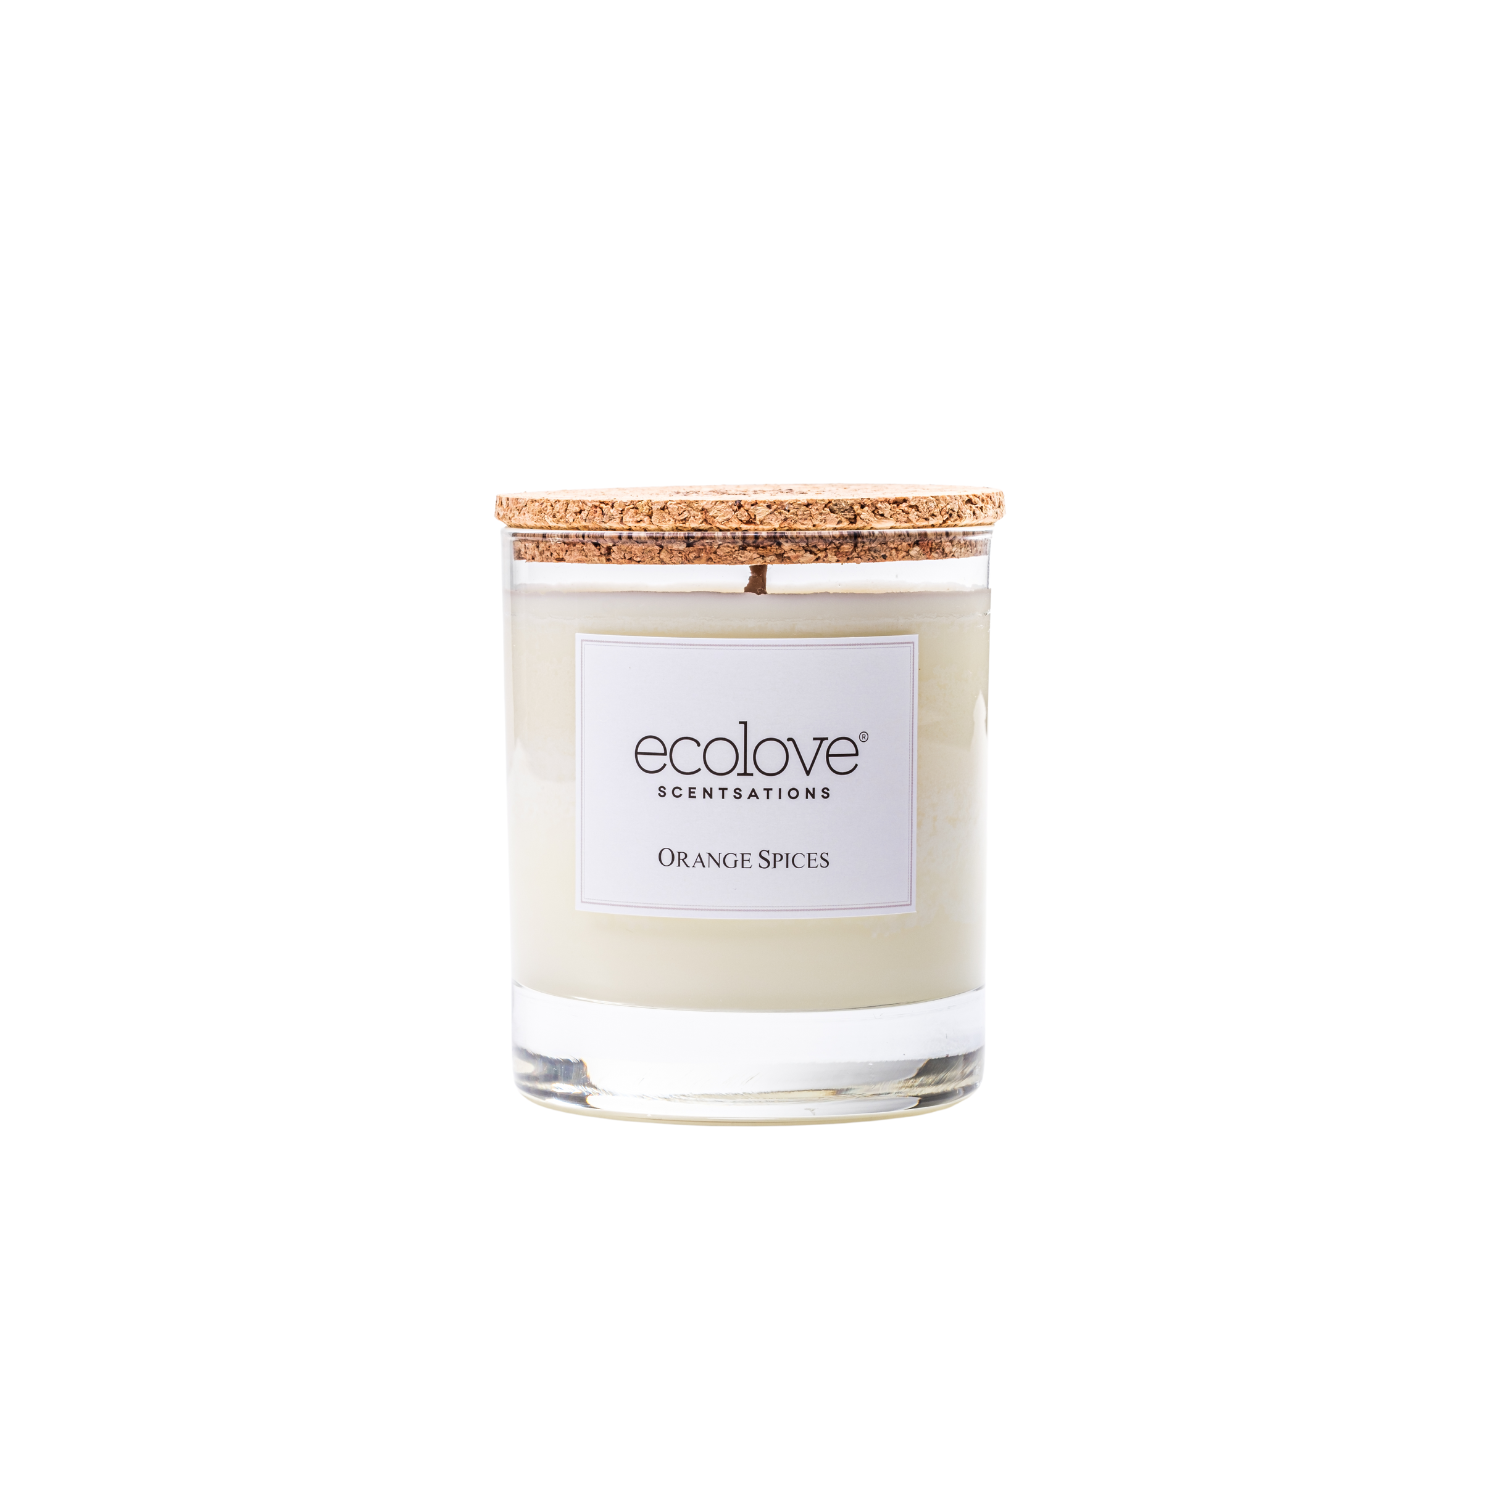 Ecolove Orange Spices Candle (Single Wick)